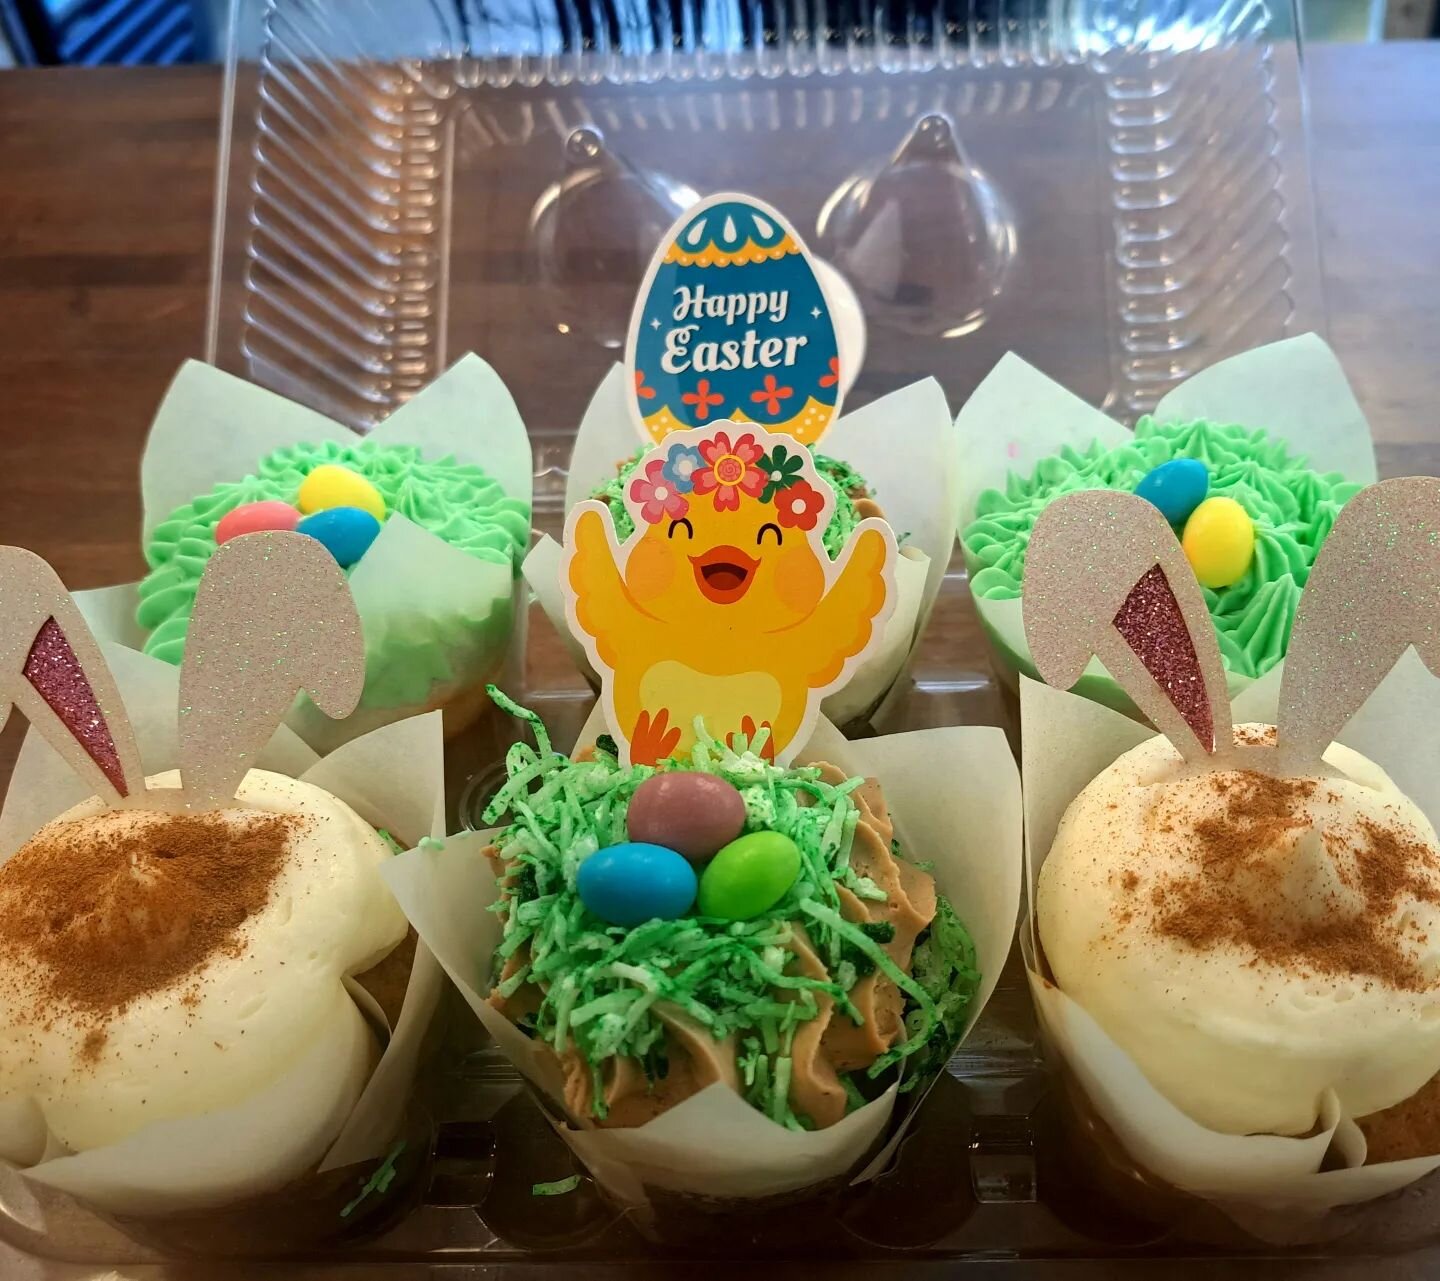 Have you ordered your Easter 6-pack special yet?? 
www.goldminecupcakes.com 🐰🐣